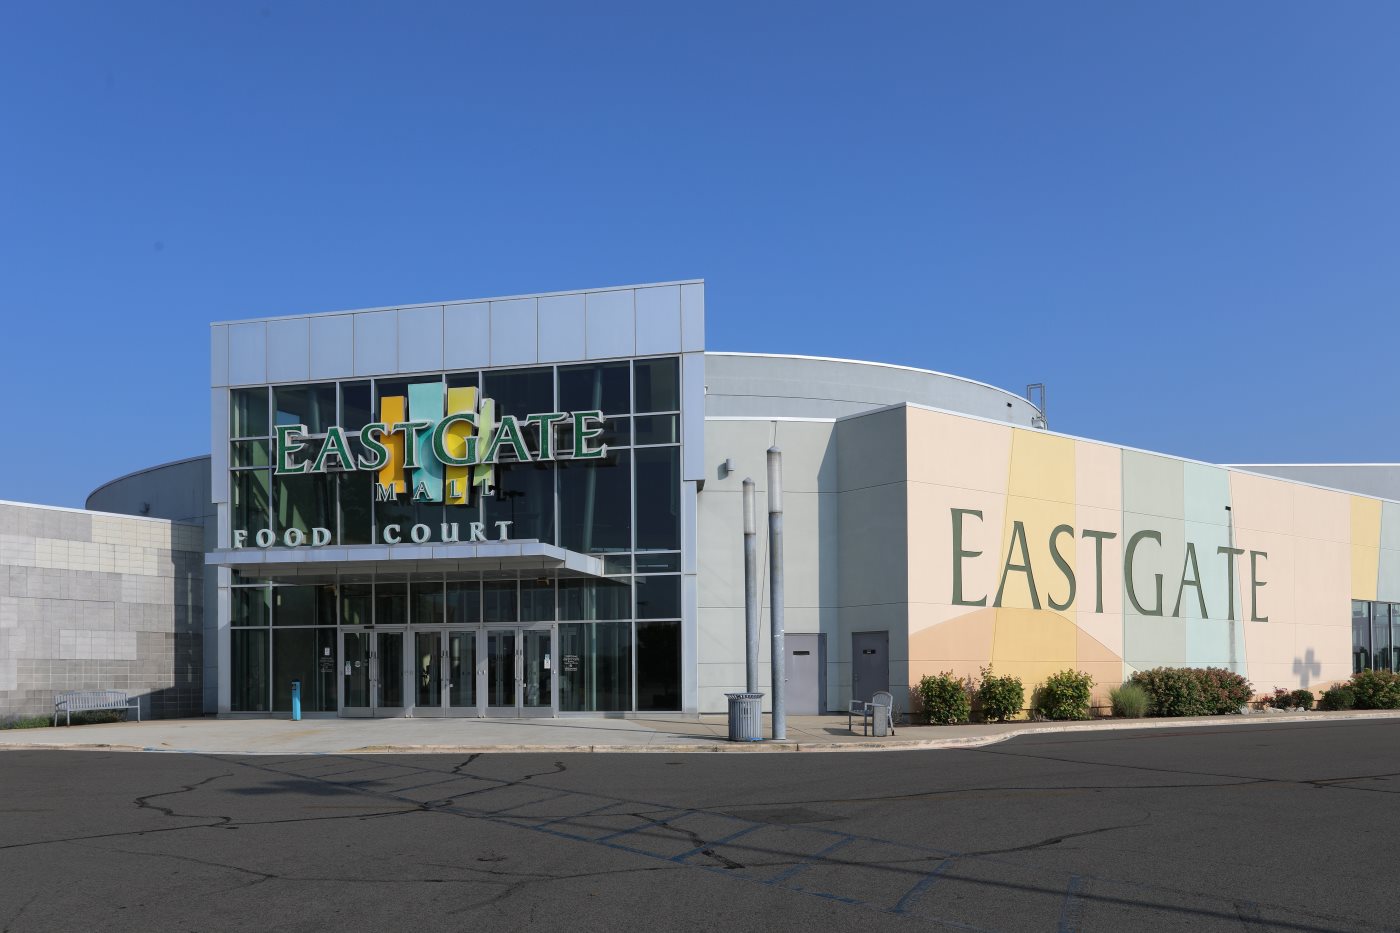 An exterior view of the East Gate Mall near the Fox Chase North community.